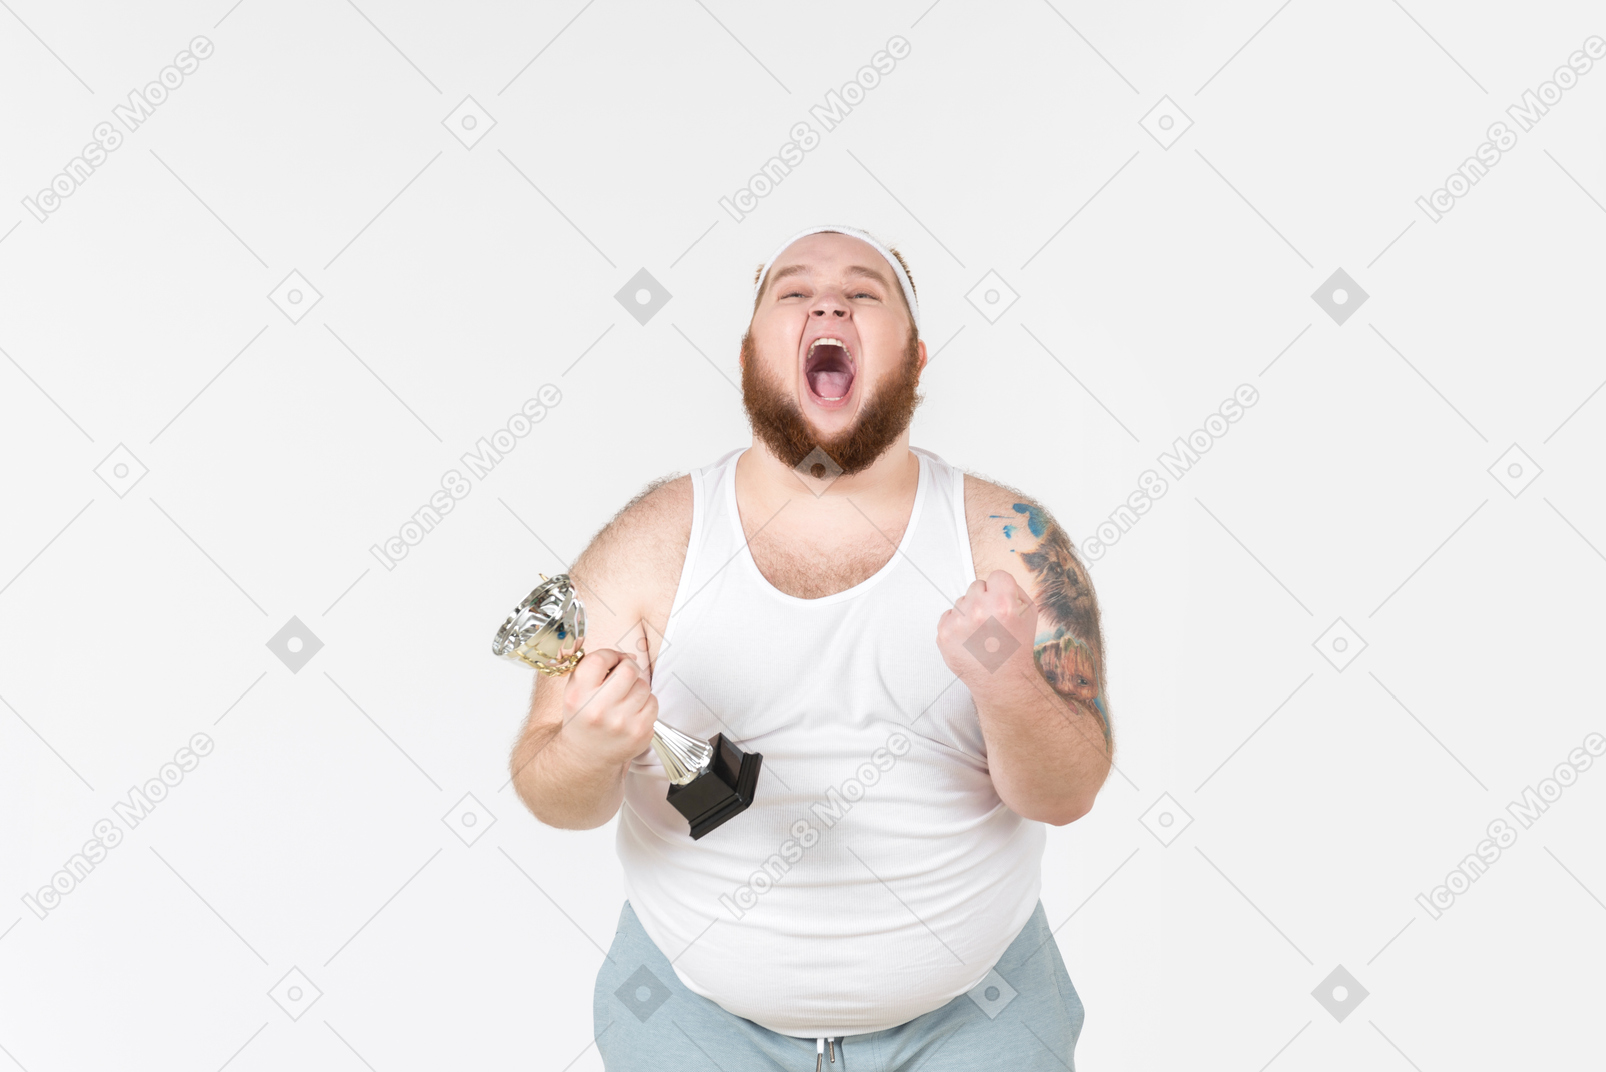 Big guy in sportswear screaming on excitement and holding trophy